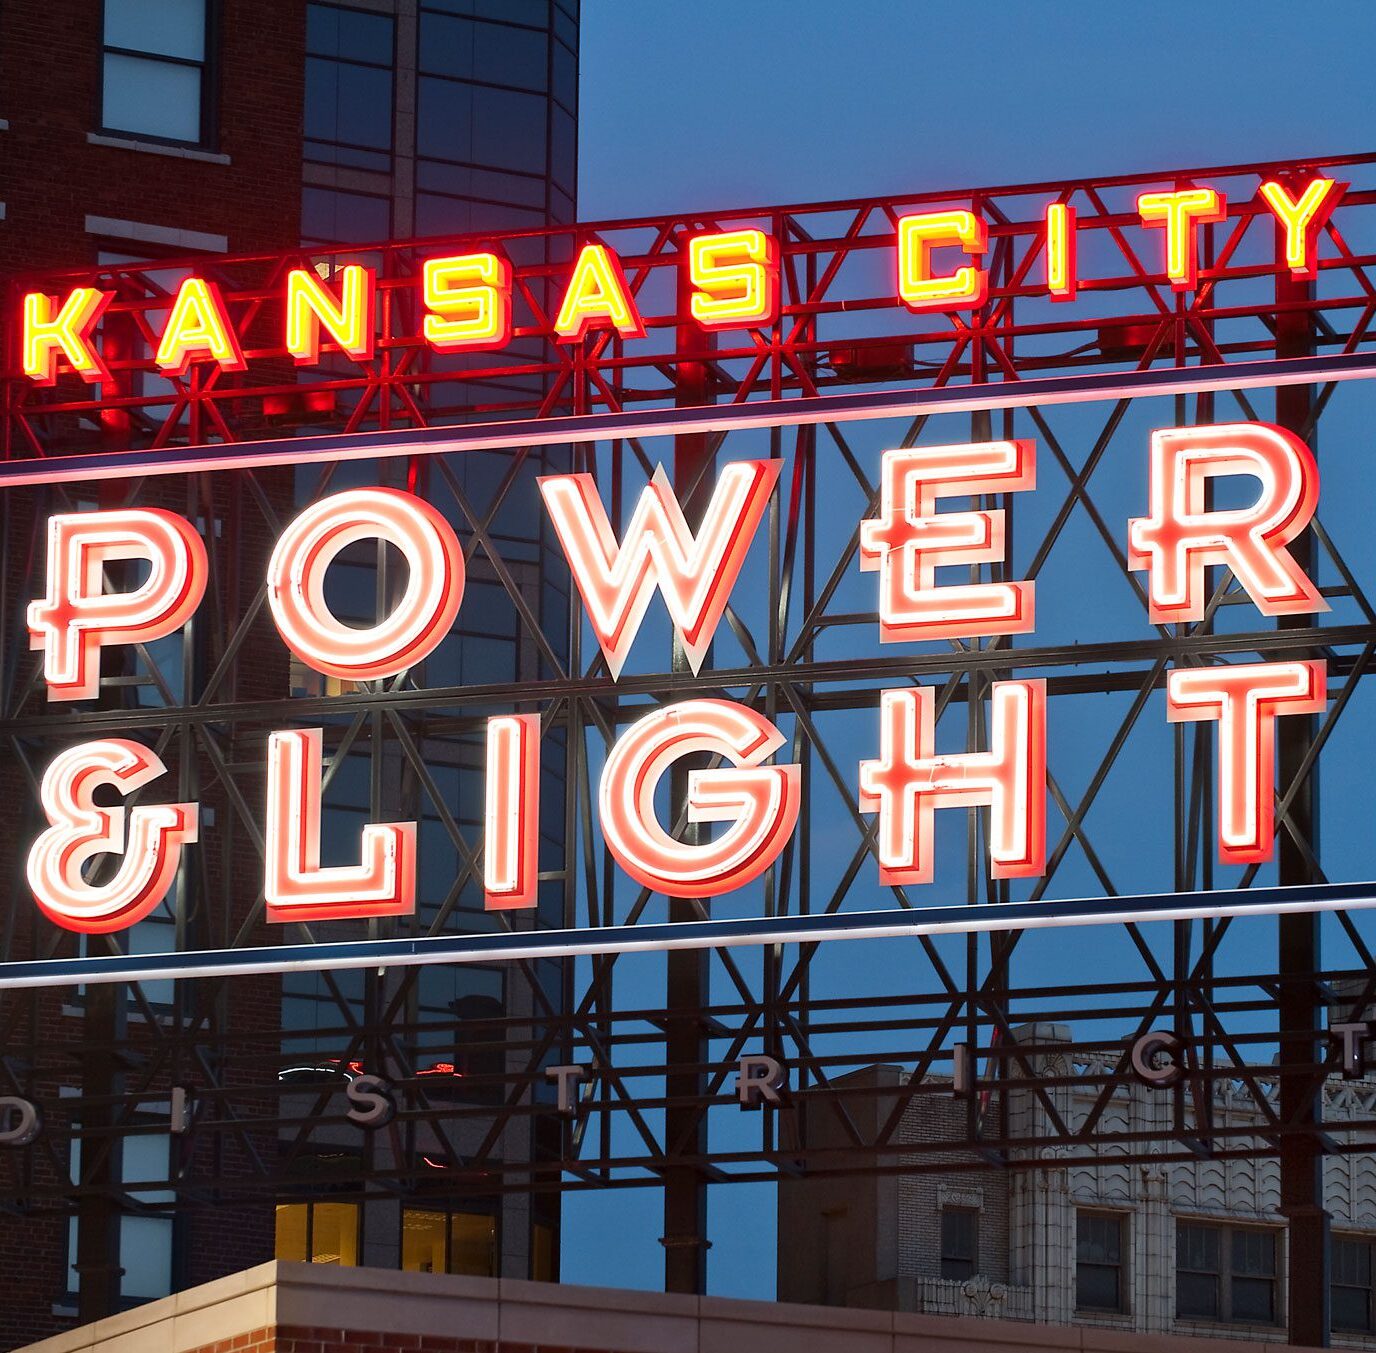 Highlighted as one of the most successful examples of mixed-use areas, Kansas City Power & Light provides a dining, shopping, office, and entertainment district in Downtown Kansas City, Missouri.